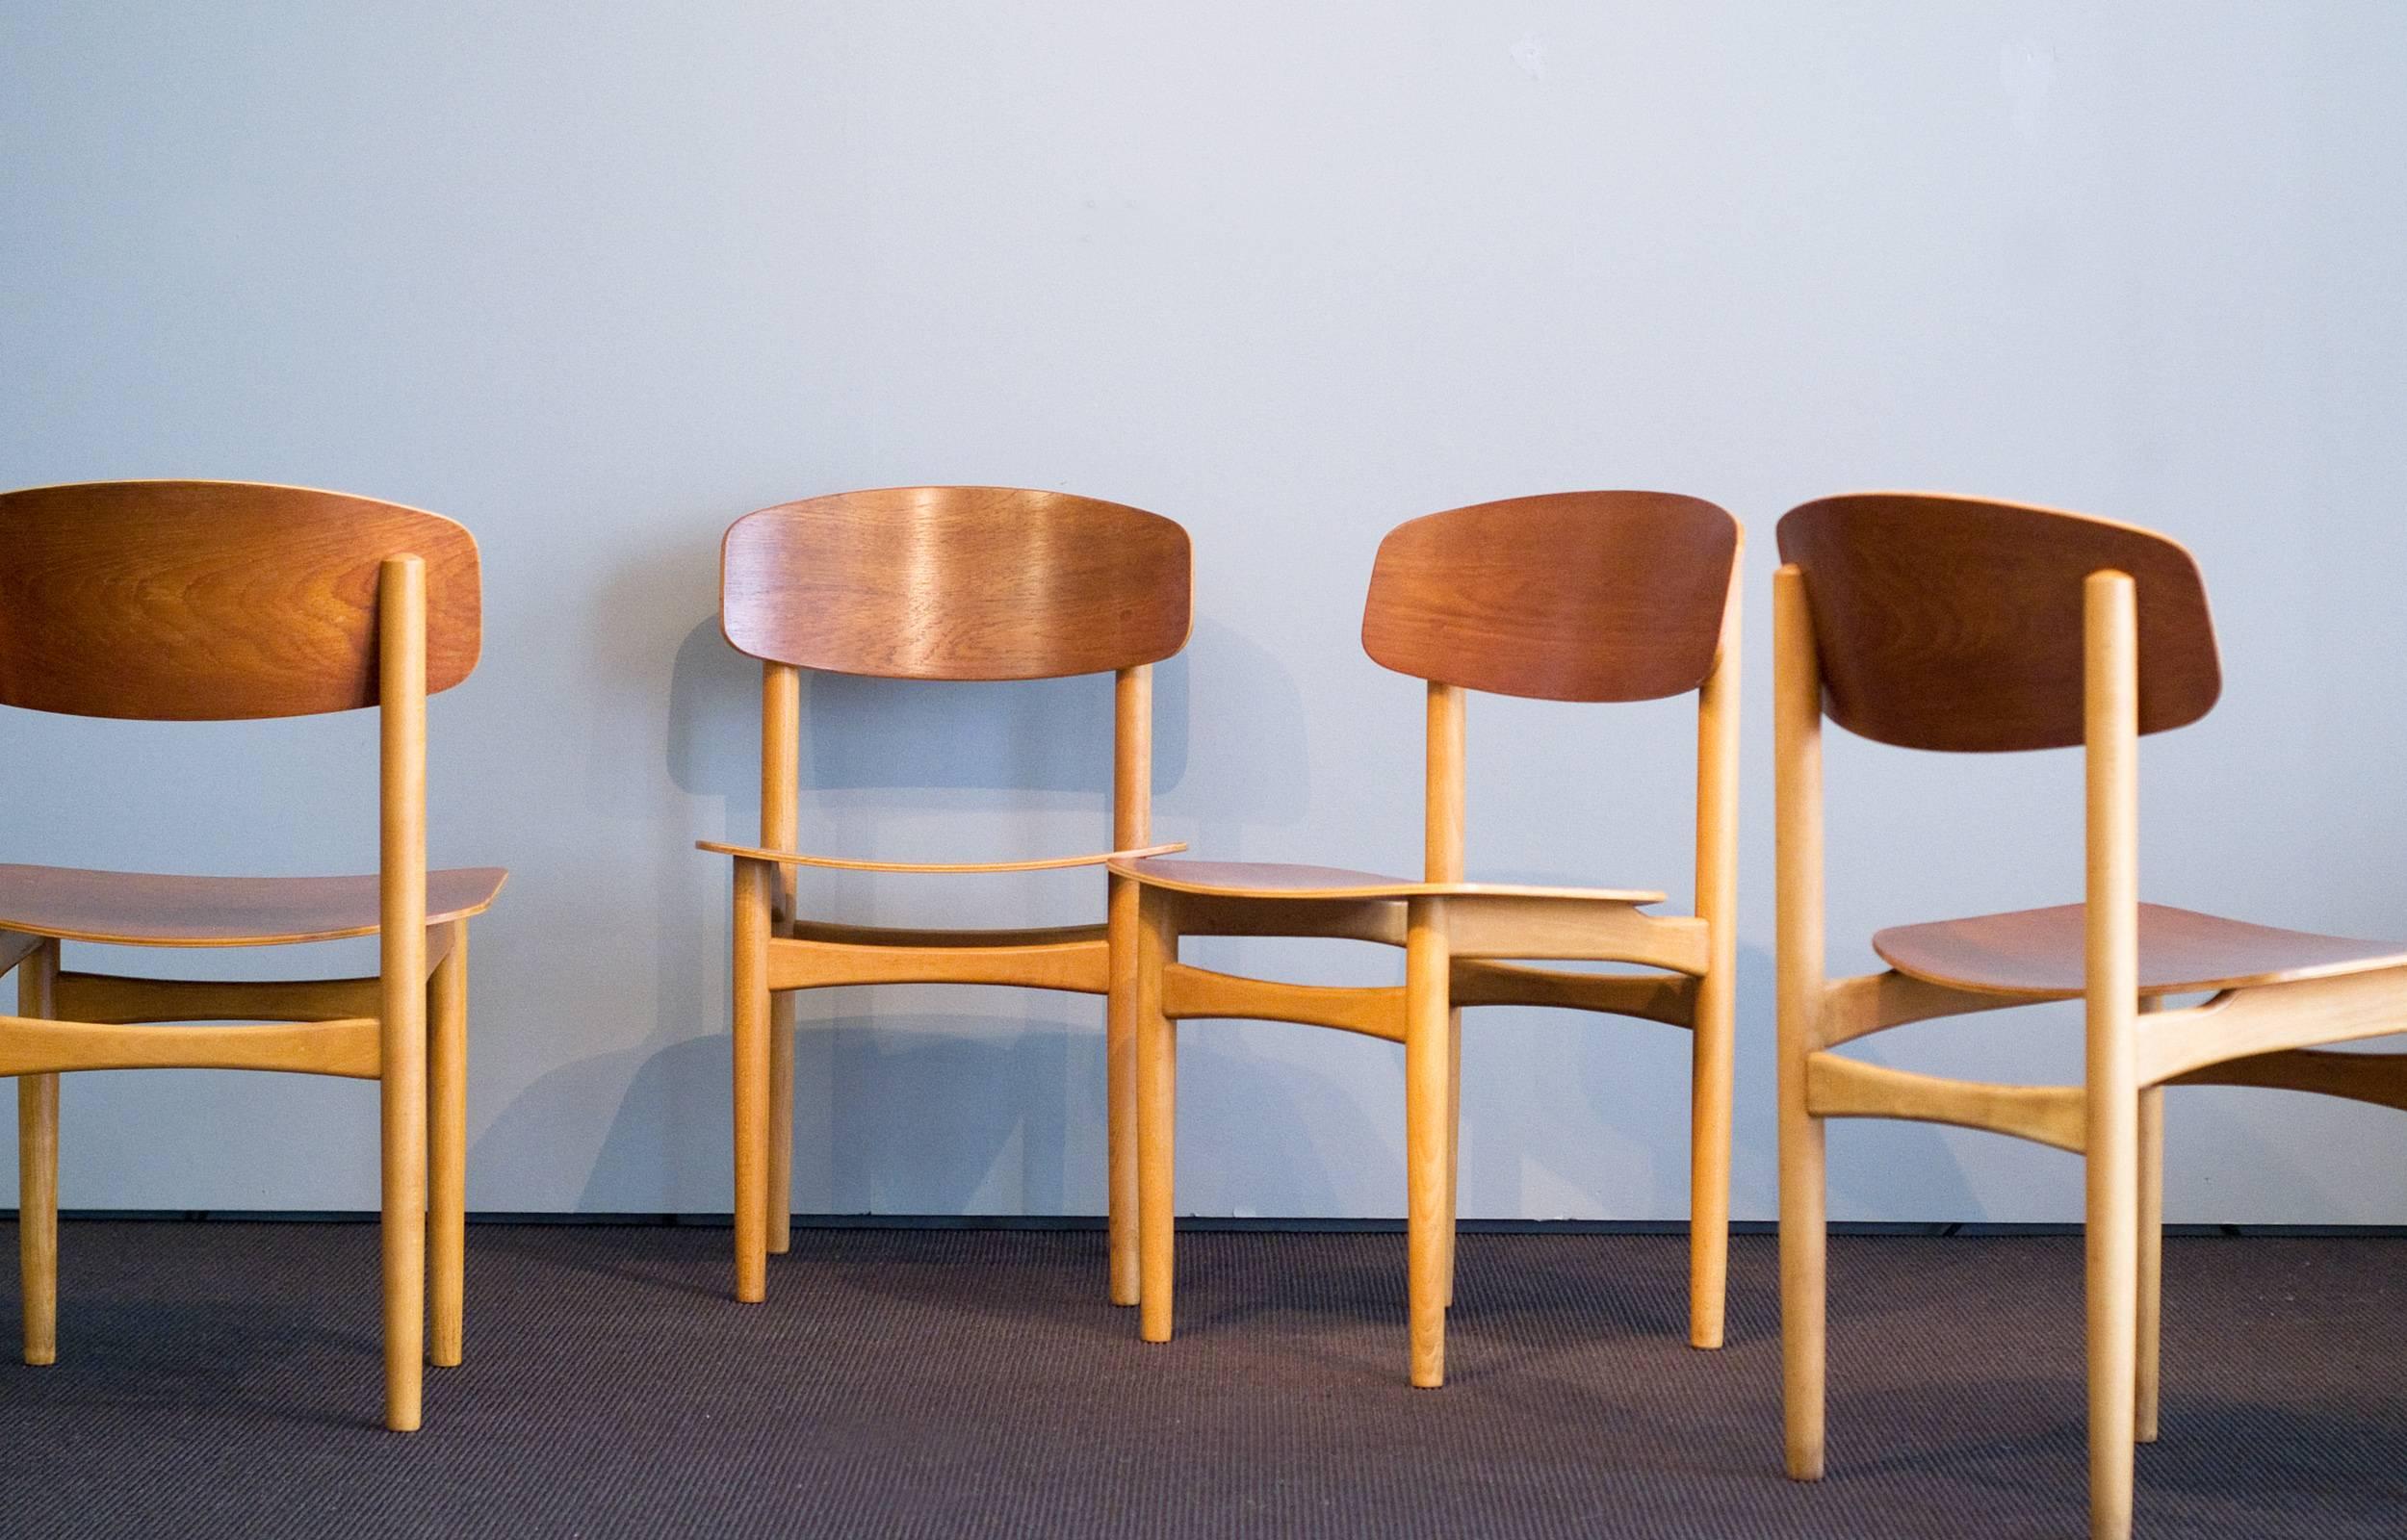 Designed in the early 50s by one of the great Danish masters of midcentury design, Borge Mogensen. For Soborg Mobler, Mogensen developed a complete furniture program of quality crafted everyday furniture. With the downward tapering legs and the use